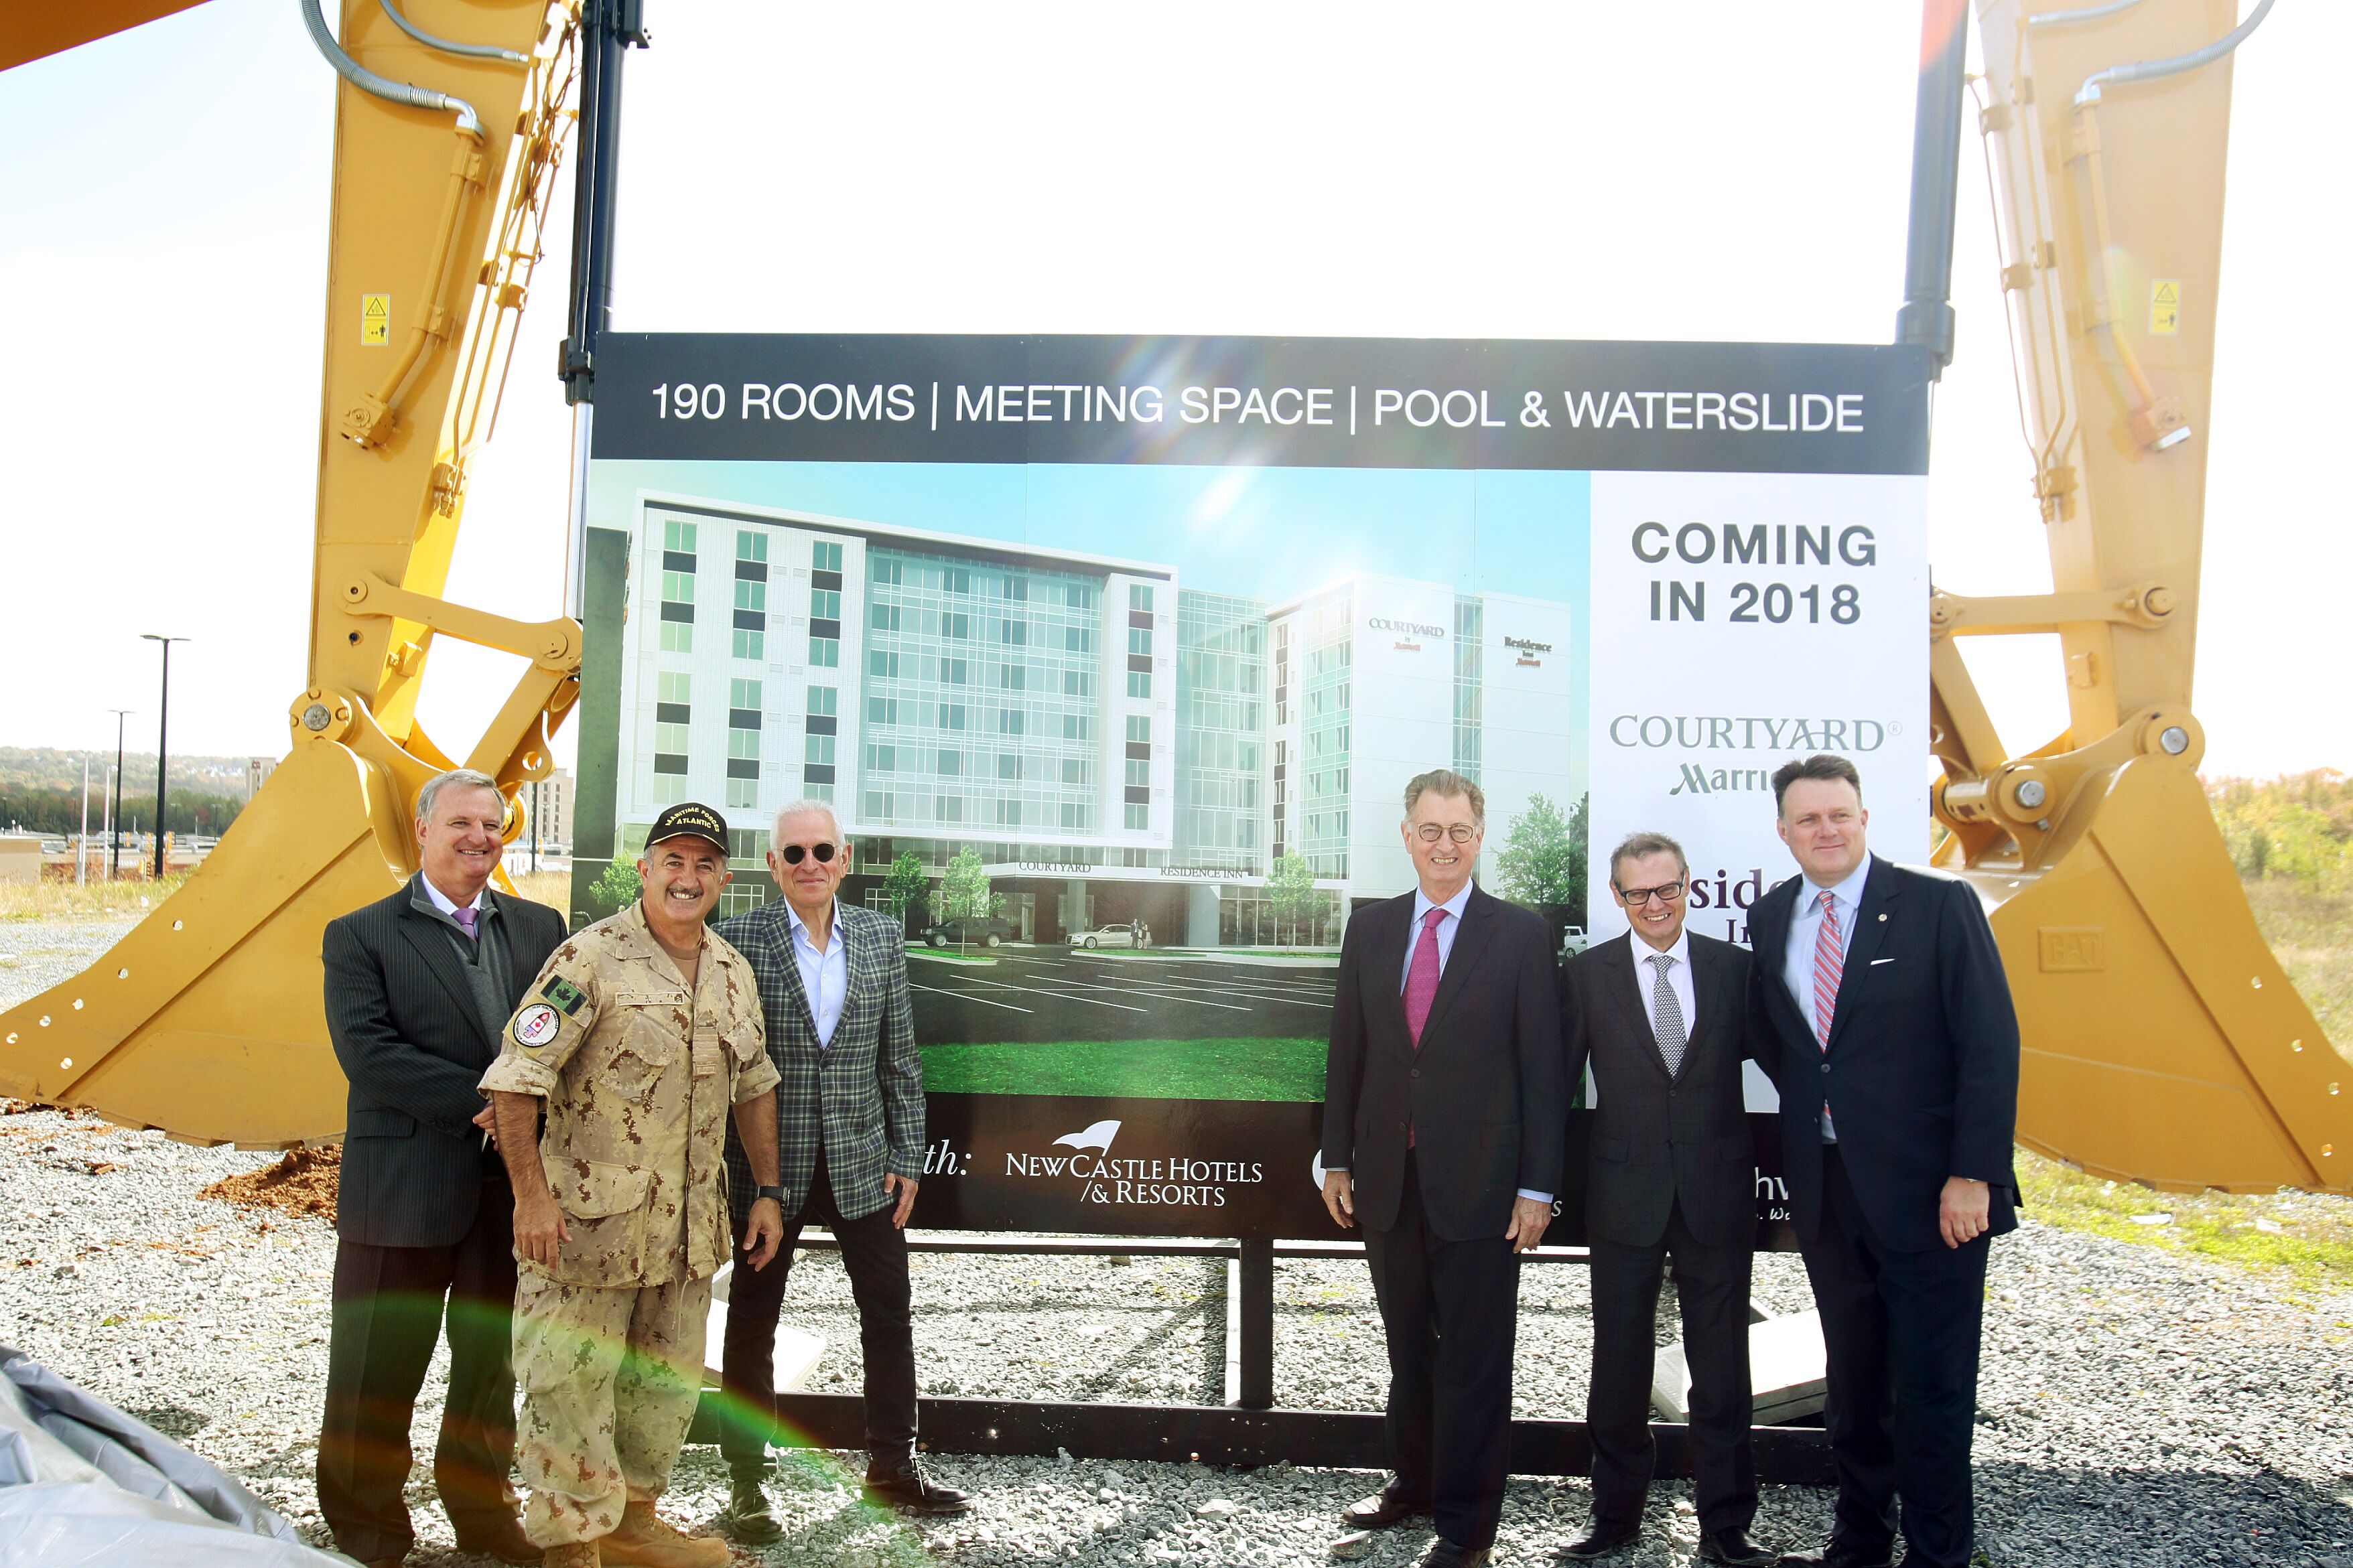 The project is estimated to be completed in Q3 2018 and will include a 106-room Courtyard by Marriott and 84-suite Residence